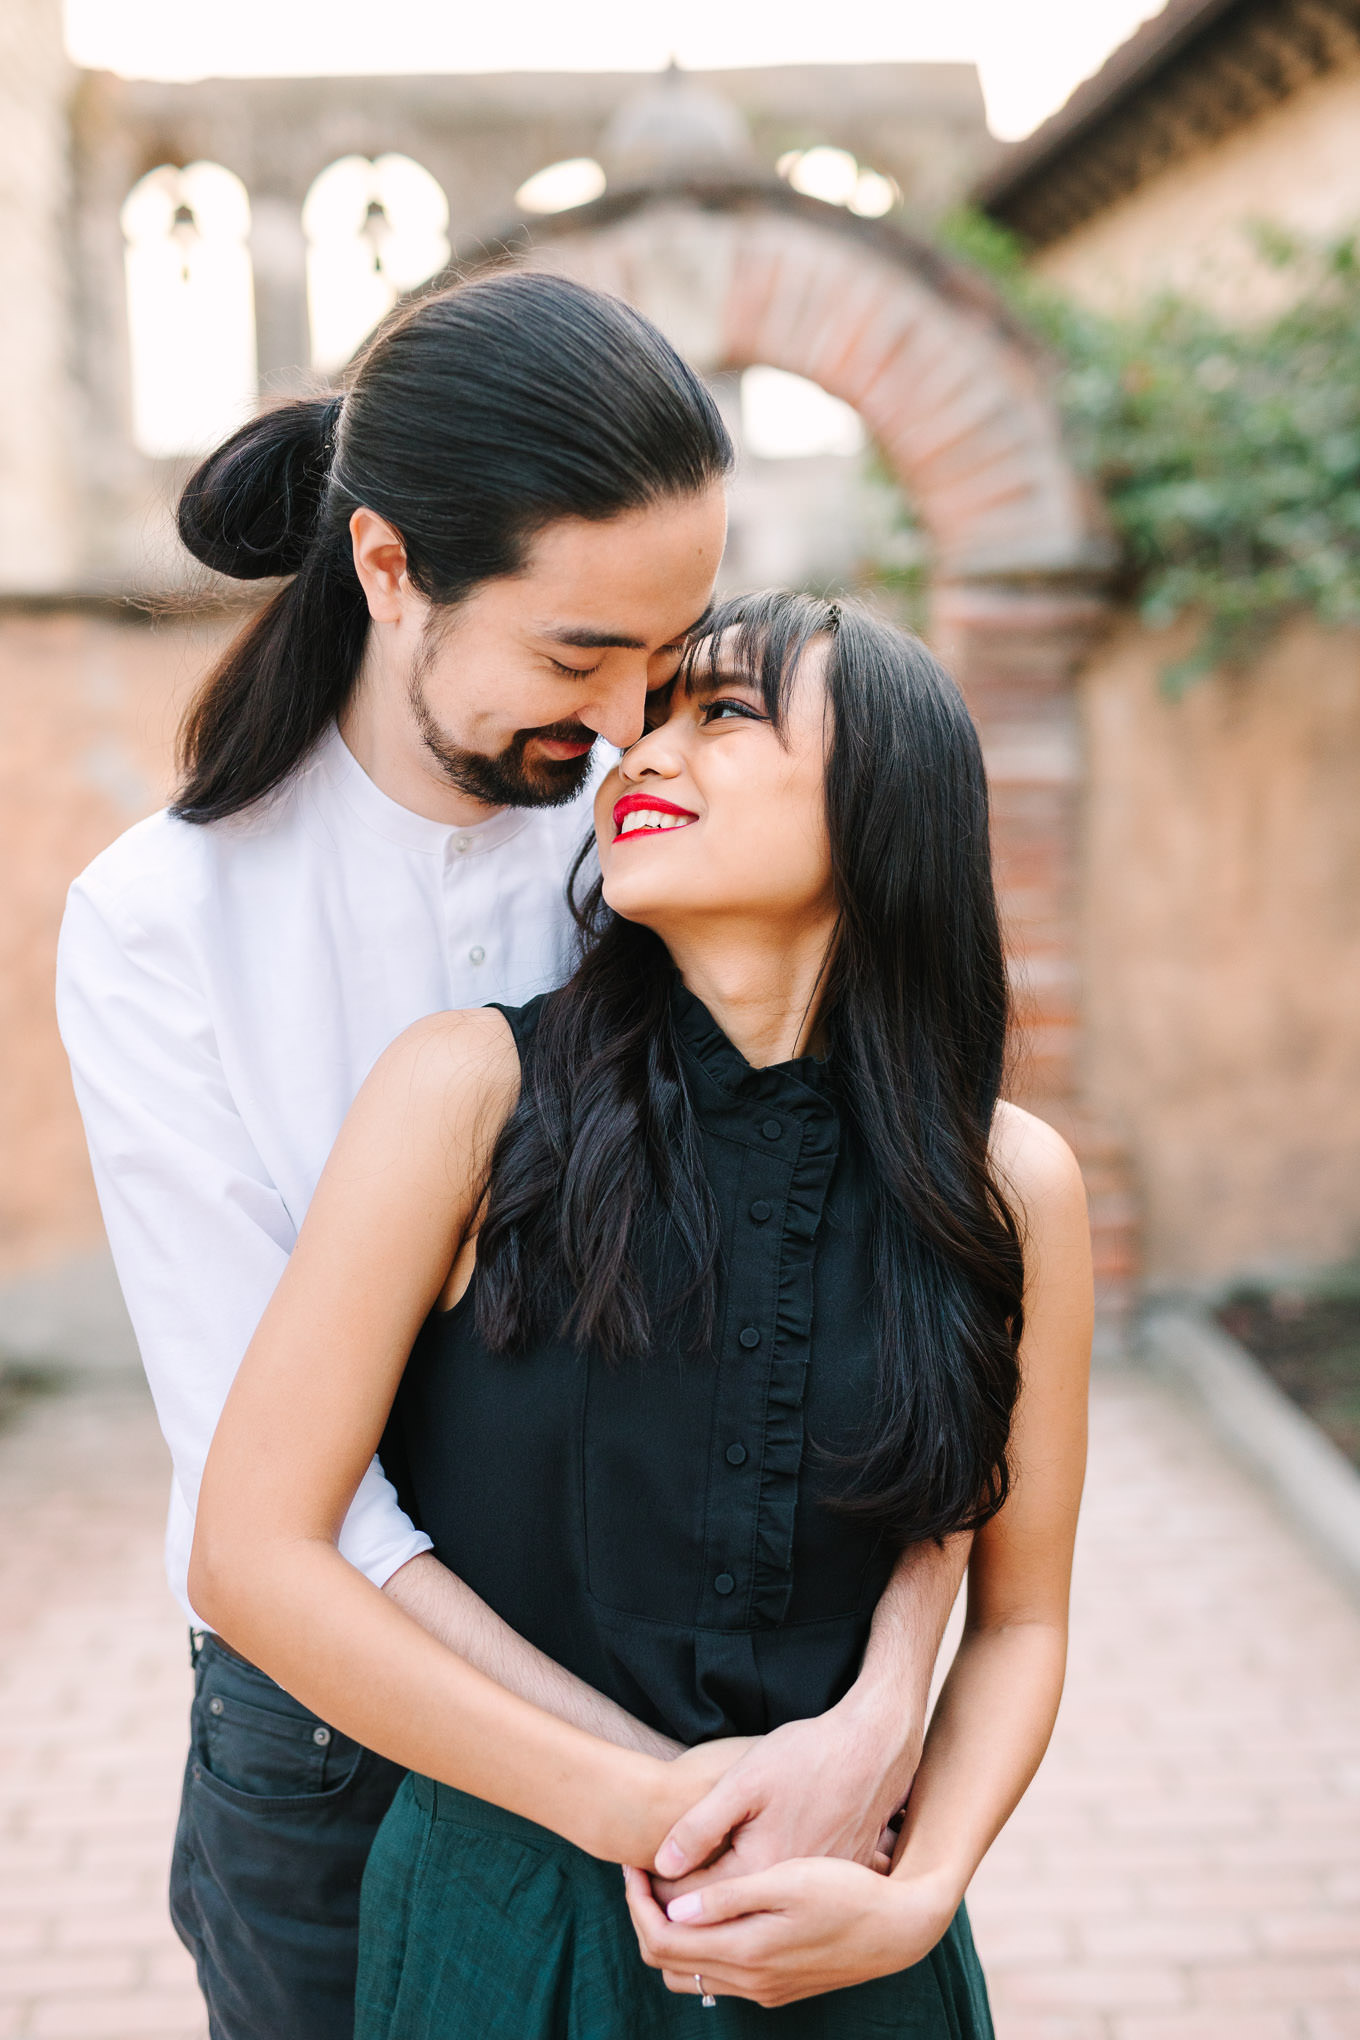 Mission San Juan Capistrano engagement session | Wedding and elopement photography roundup | Los Angeles and Palm Springs photographer | #losangeleswedding #palmspringswedding #elopementphotographer Source: Mary Costa Photography | Los Angeles